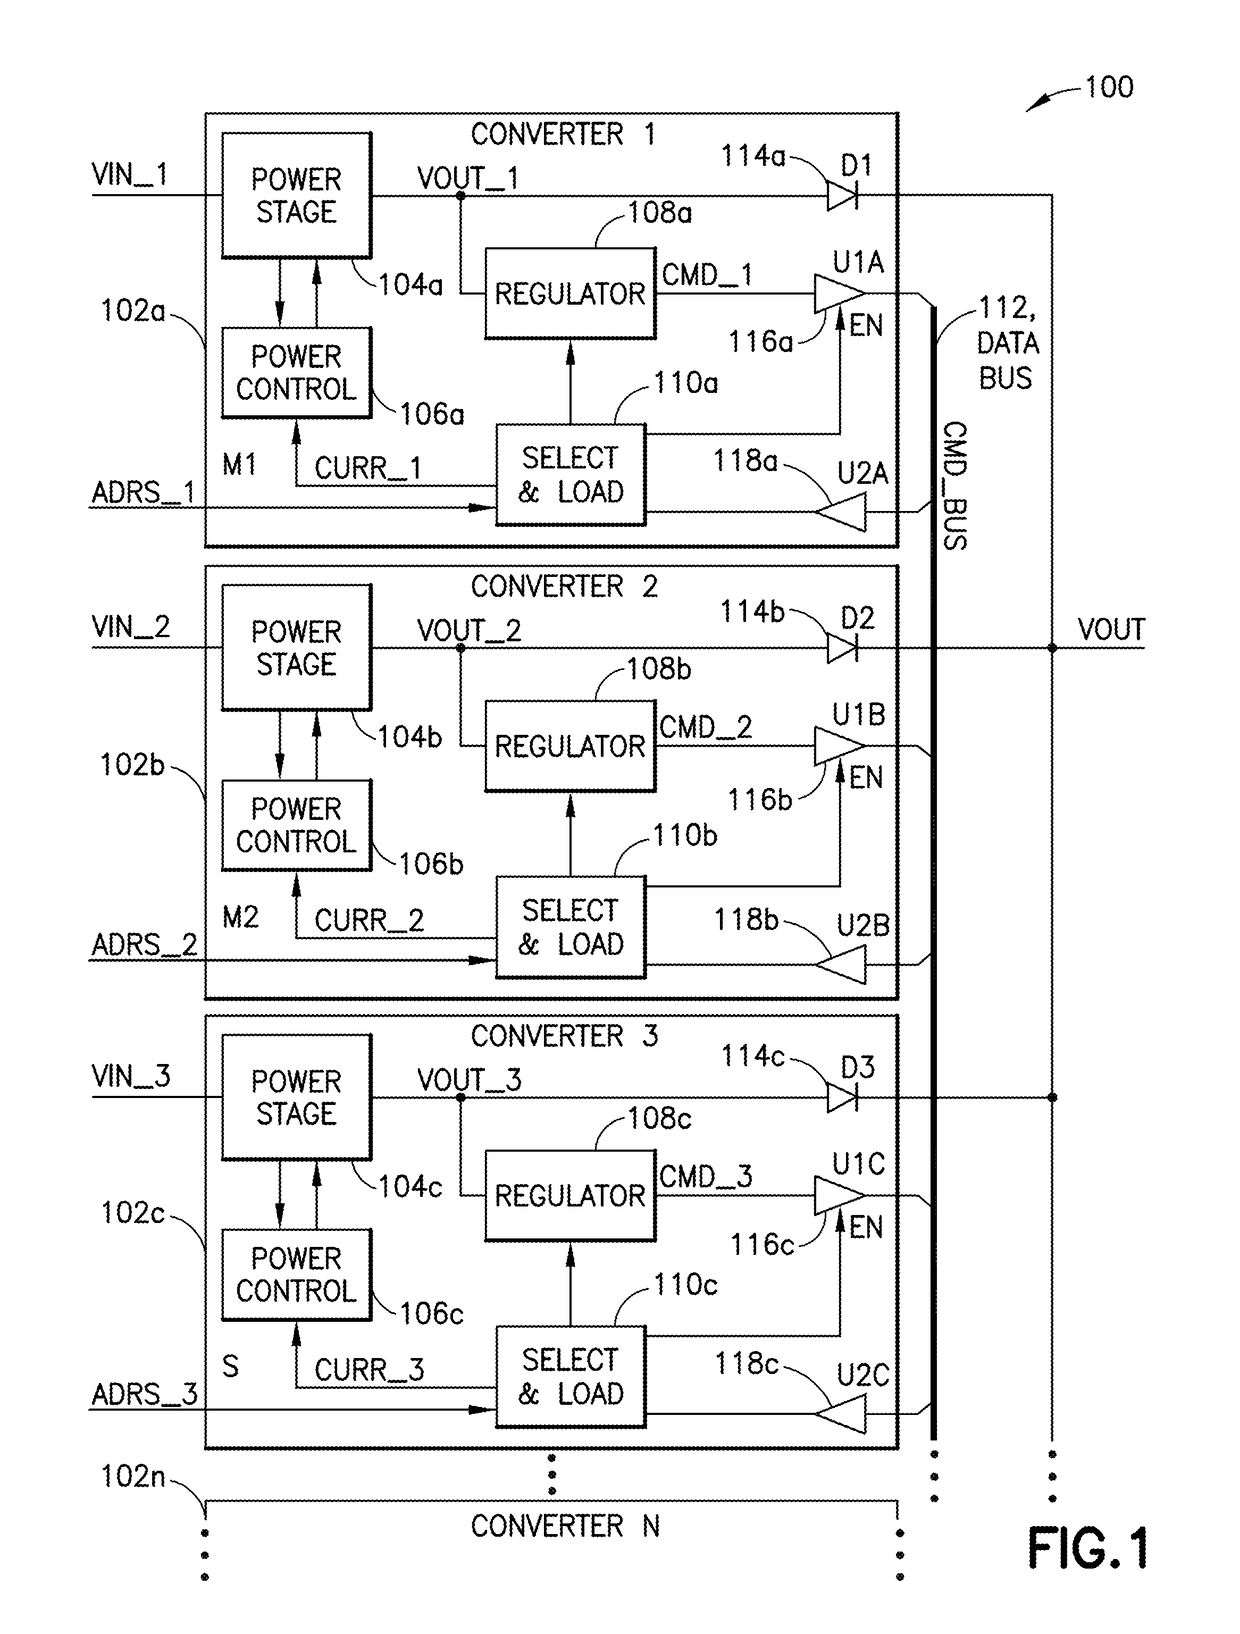 Load sharing between parallel connected power converters